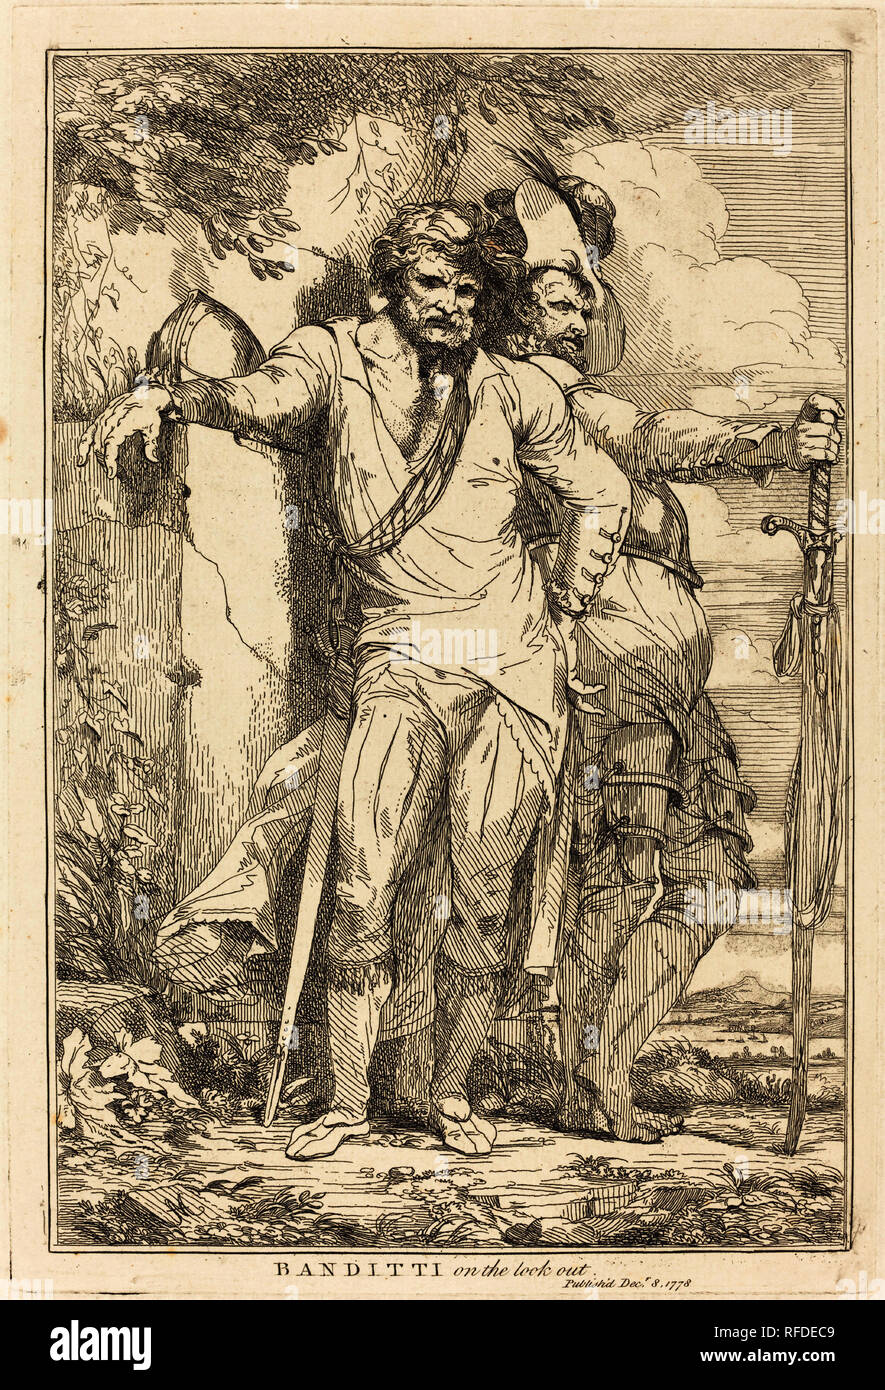 Banditti on the Look Out. Dated: 1778. Dimensions: plate: 30 × 20.2 cm (11 13/16 × 7 15/16 in.)  sheet: 43.2 × 29.4 cm (17 × 11 9/16 in.). Medium: etching. Museum: National Gallery of Art, Washington DC. Author: John Hamilton Mortimer. Stock Photo